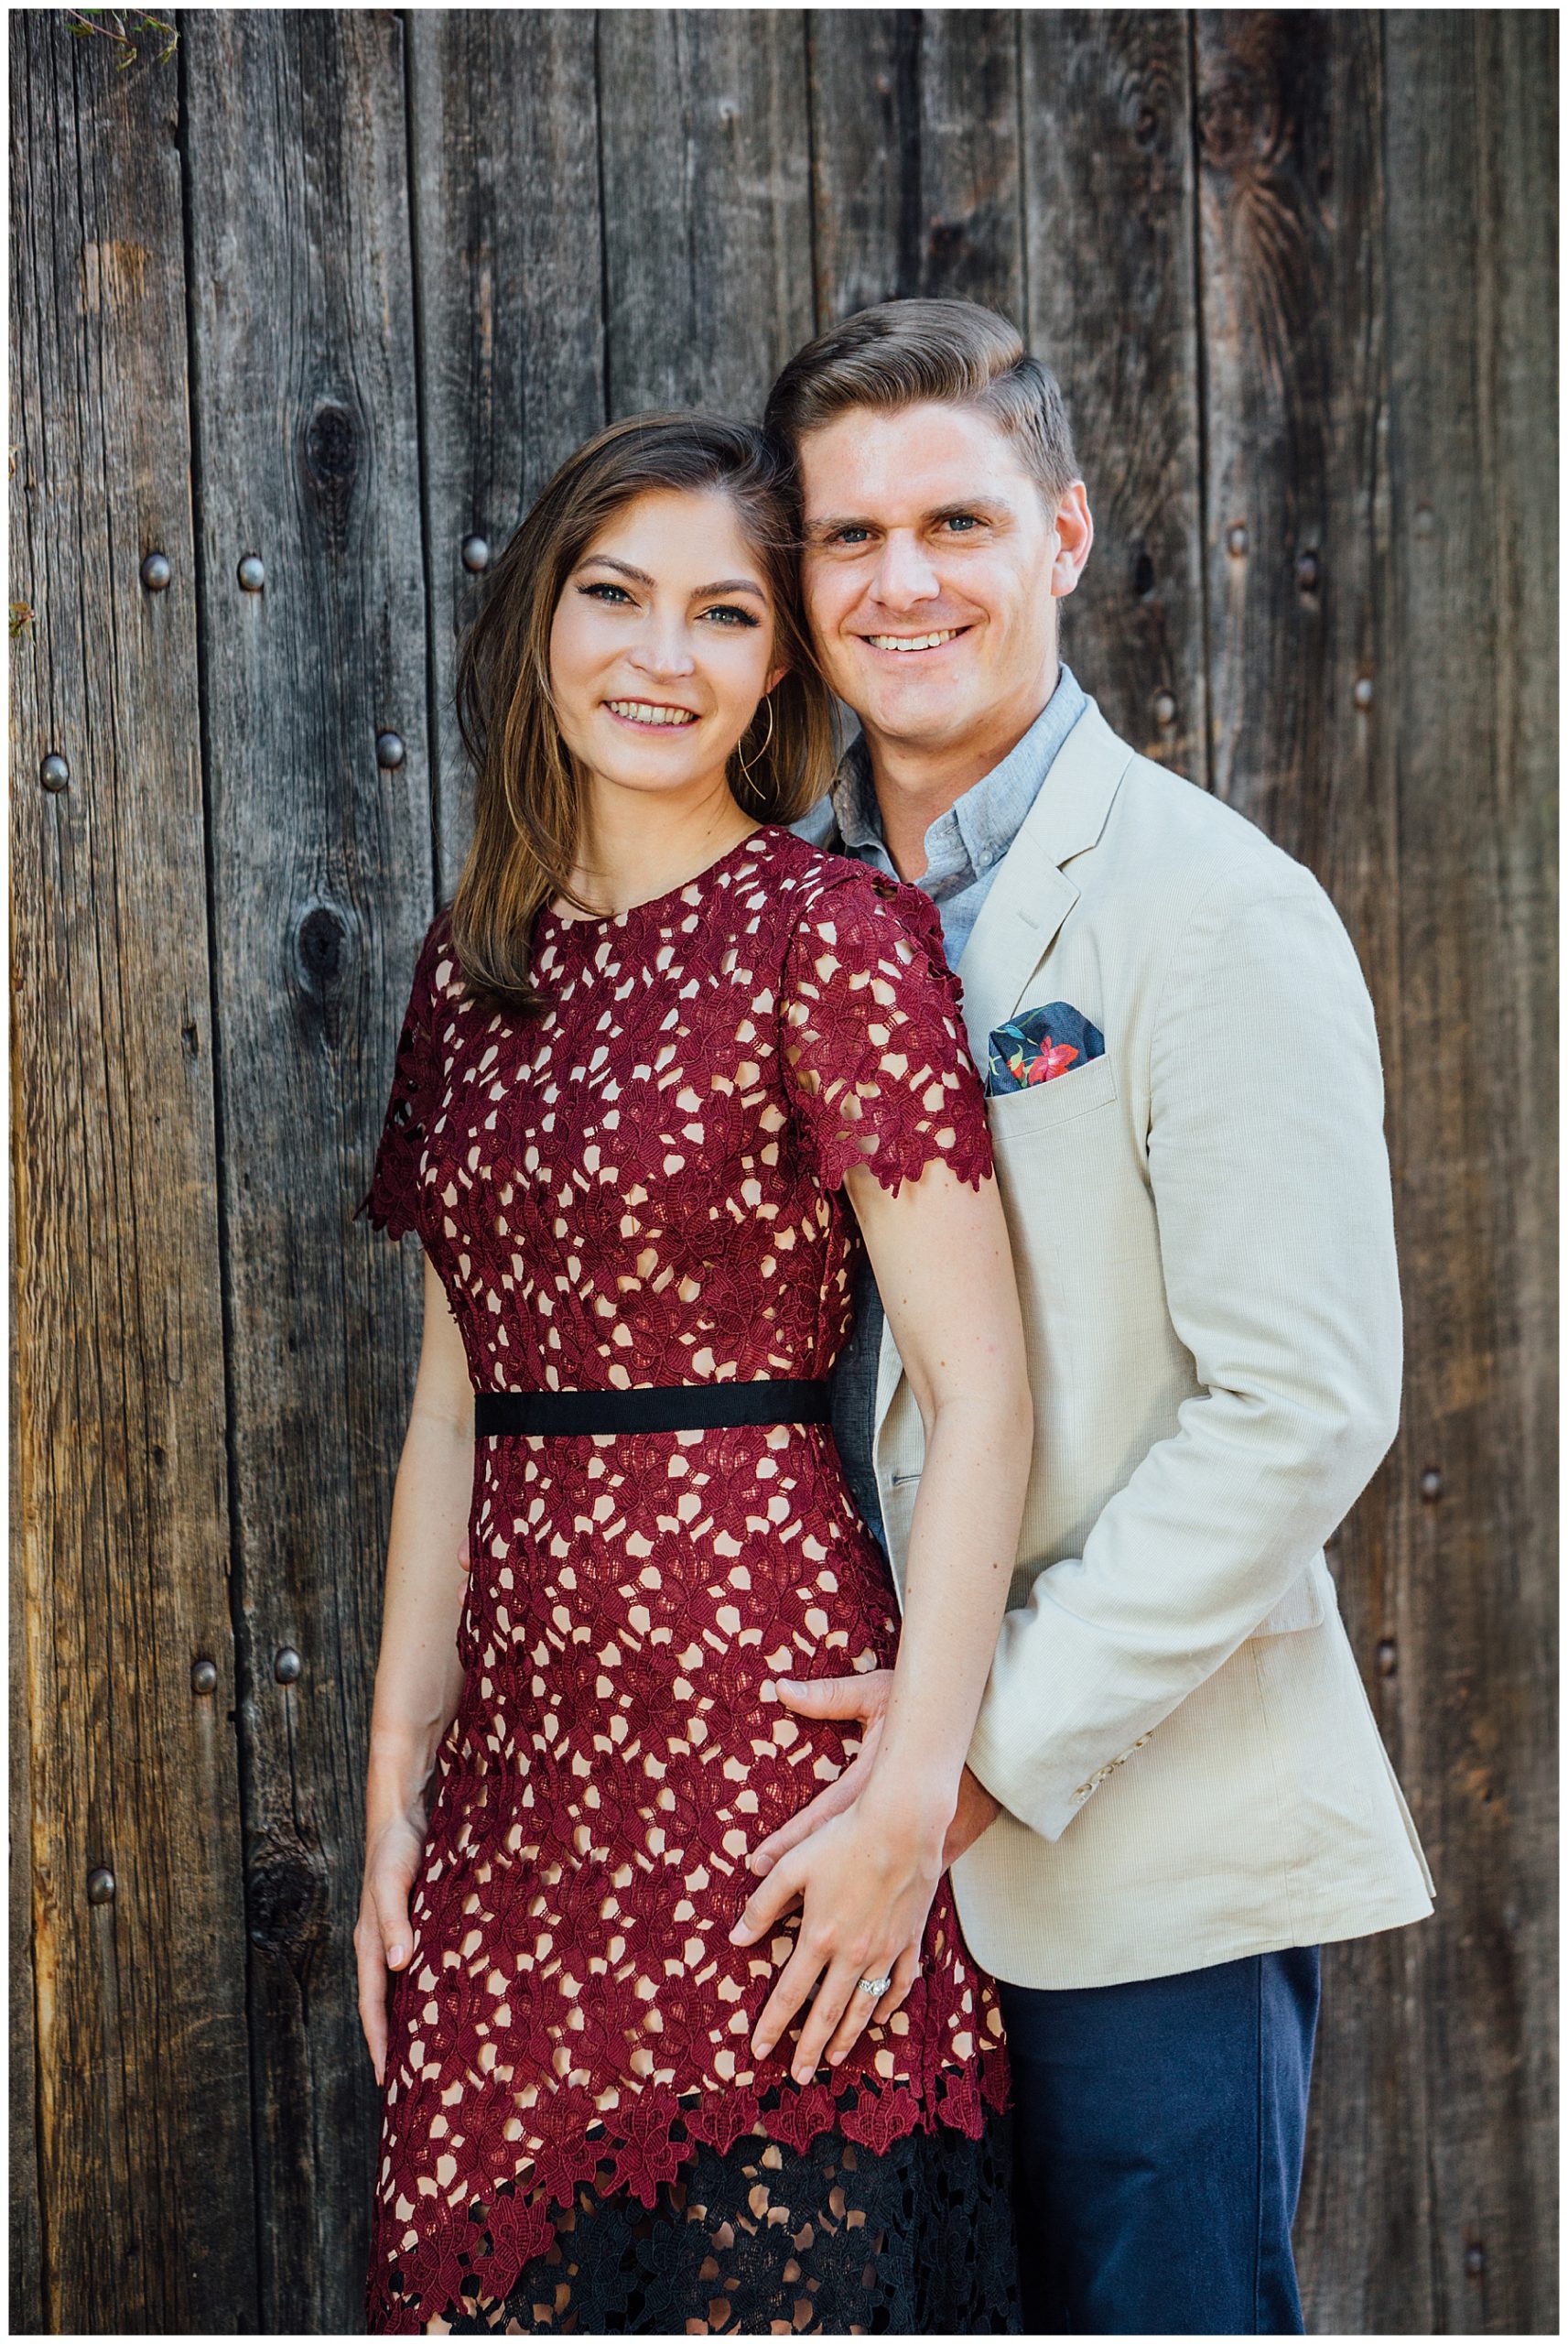 Engagement photo with wood background